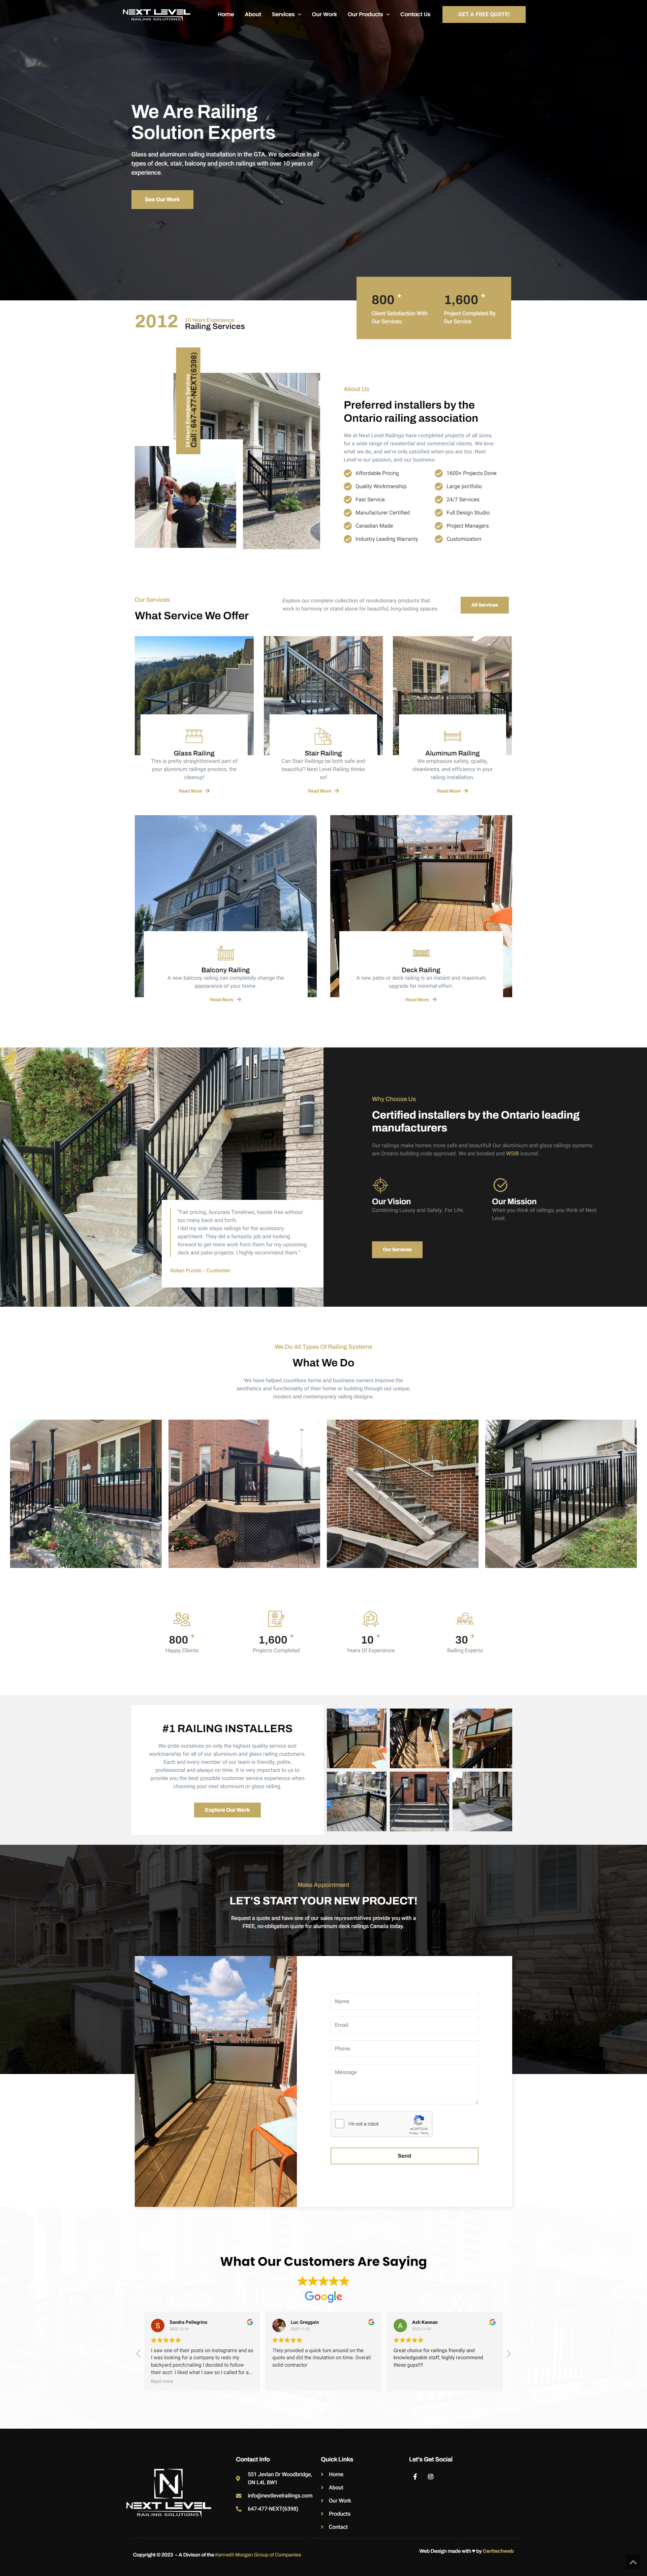 A website design for a construction company specializing in Next Level Railing Solutions.